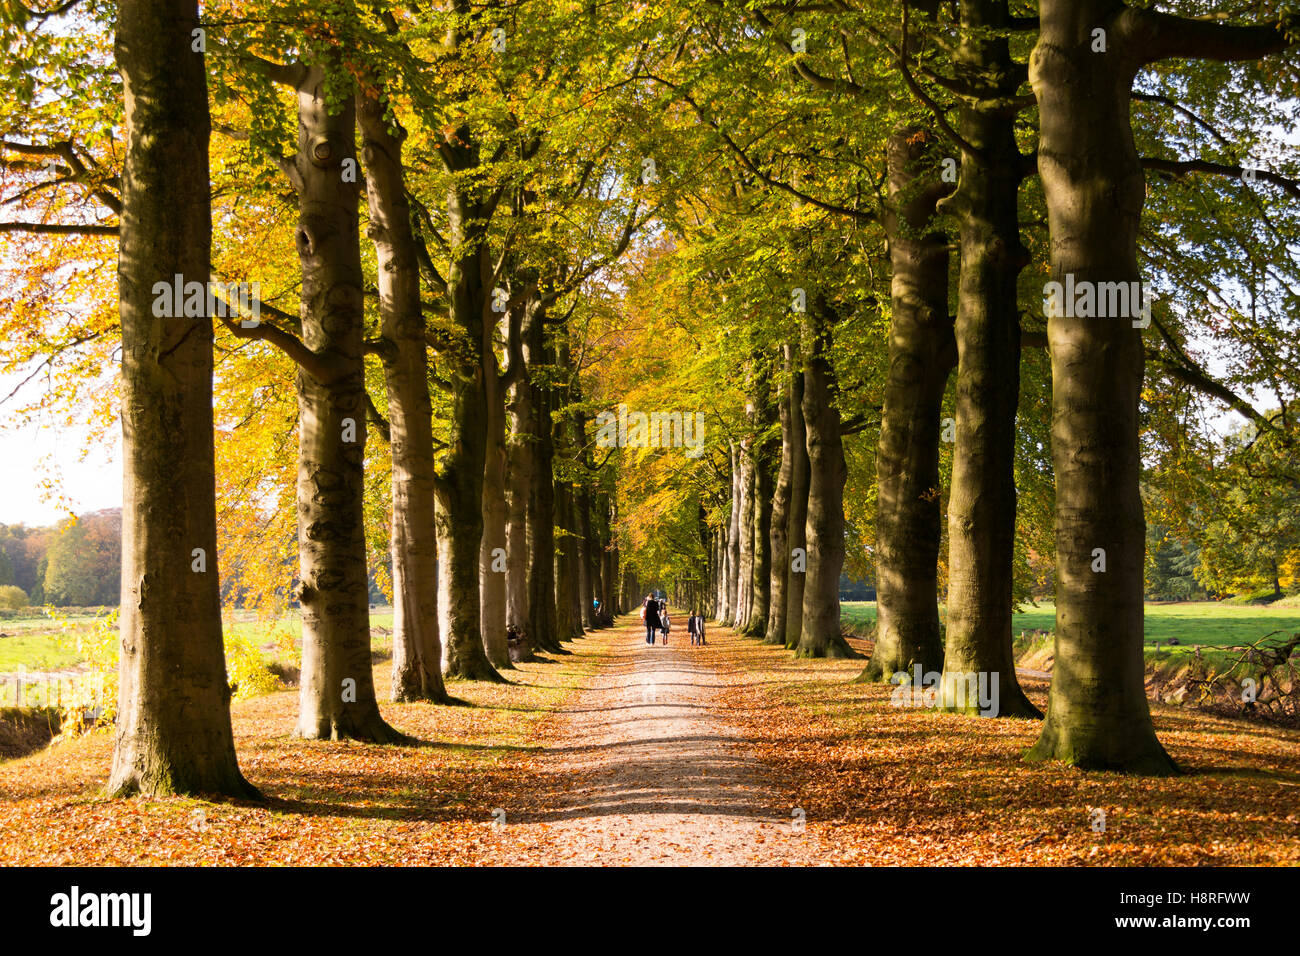 People walking on path with rows of trees in wood of country estate Boekesteyn in autumn, 's Graveland, Netherlands Stock Photo